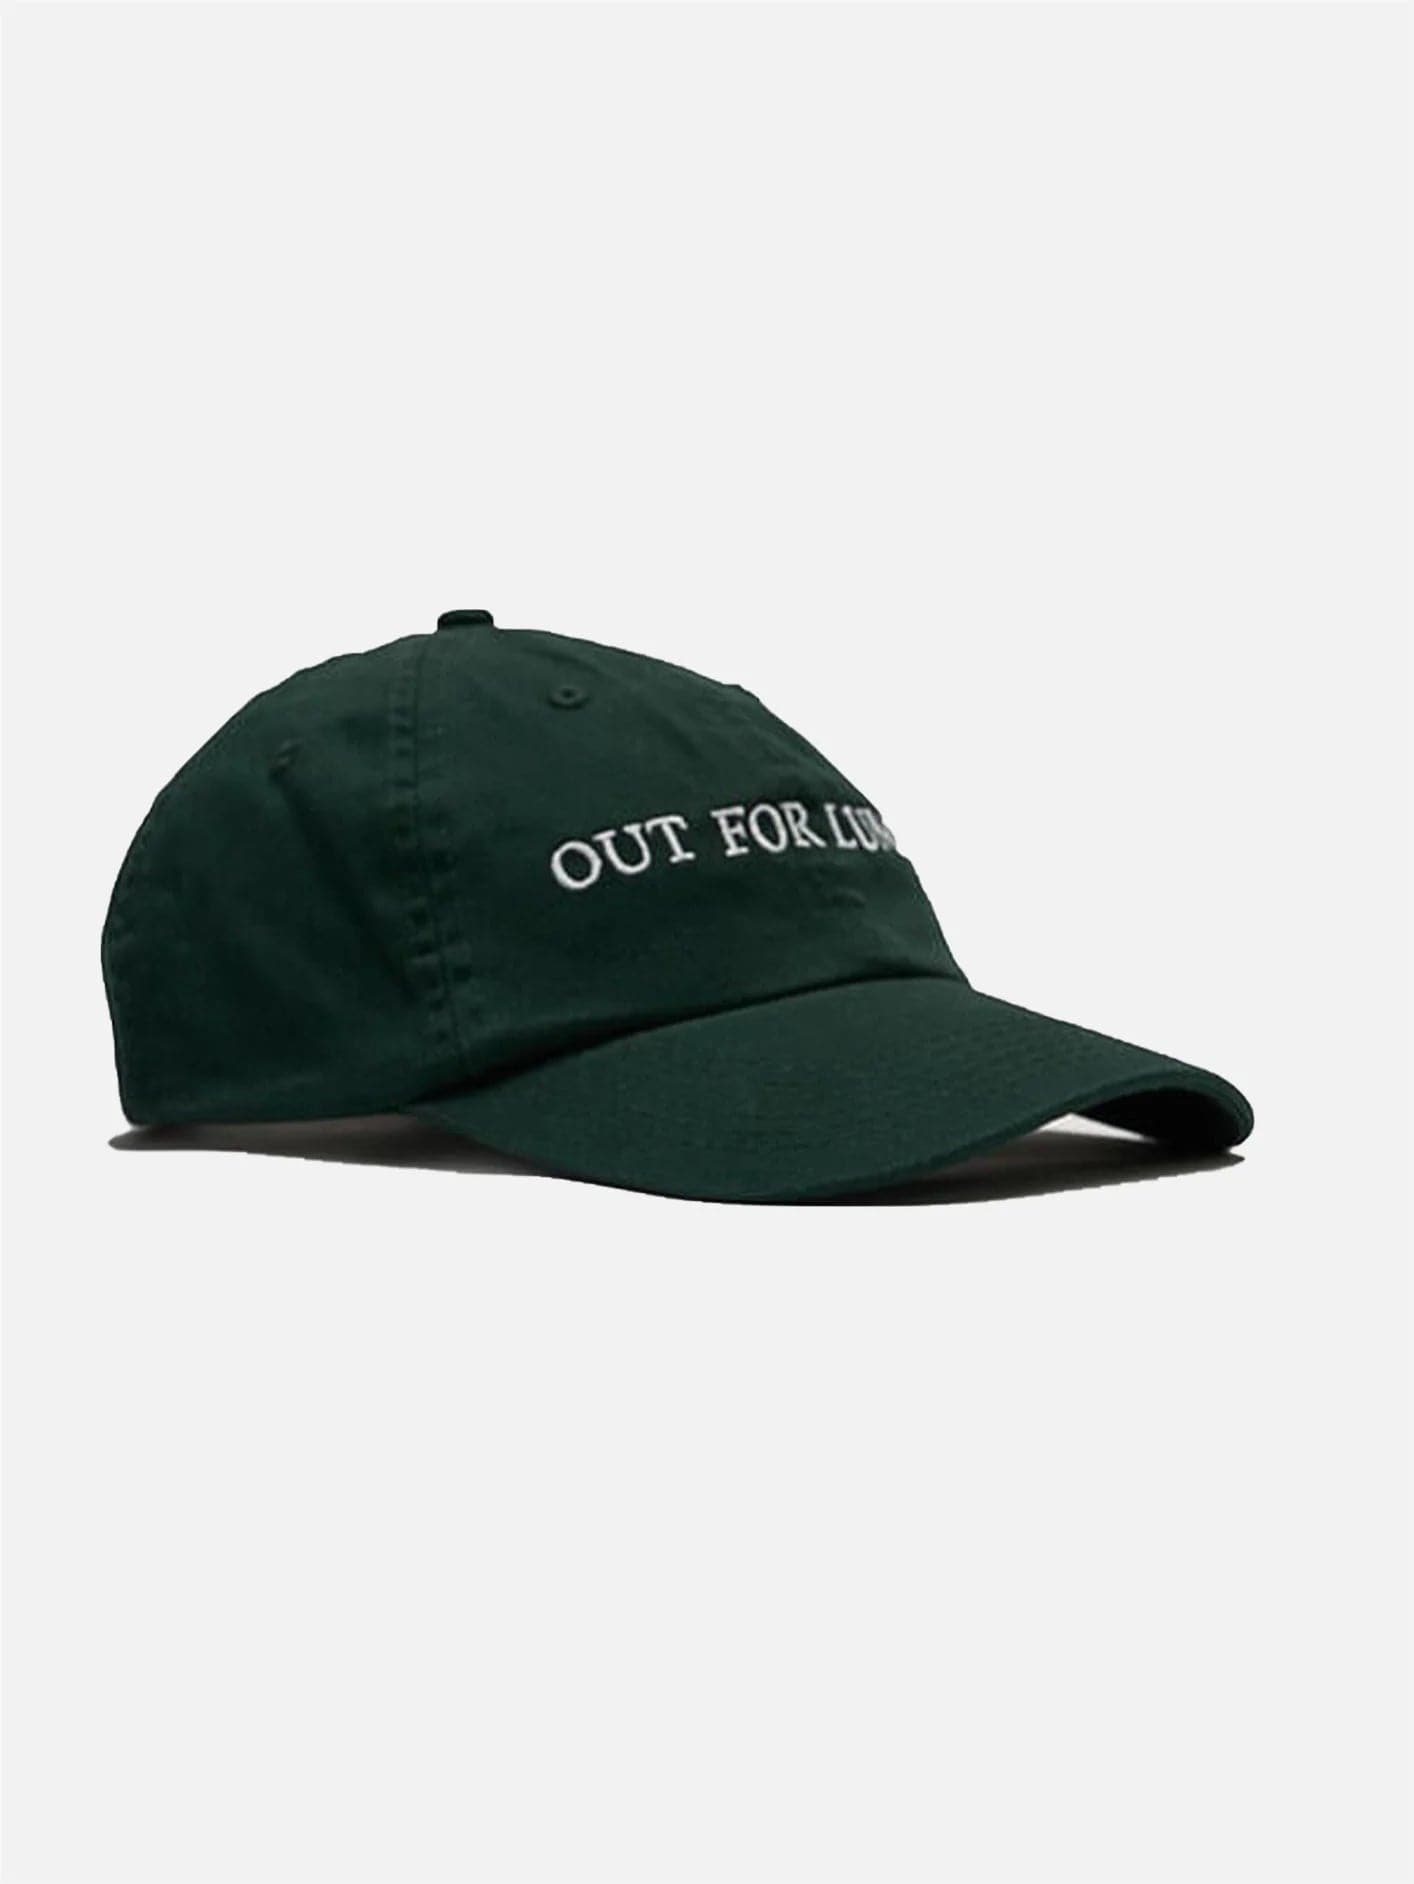 OUT FOR LUNCH HAT (GREEN) キャップ - メンズ帽子